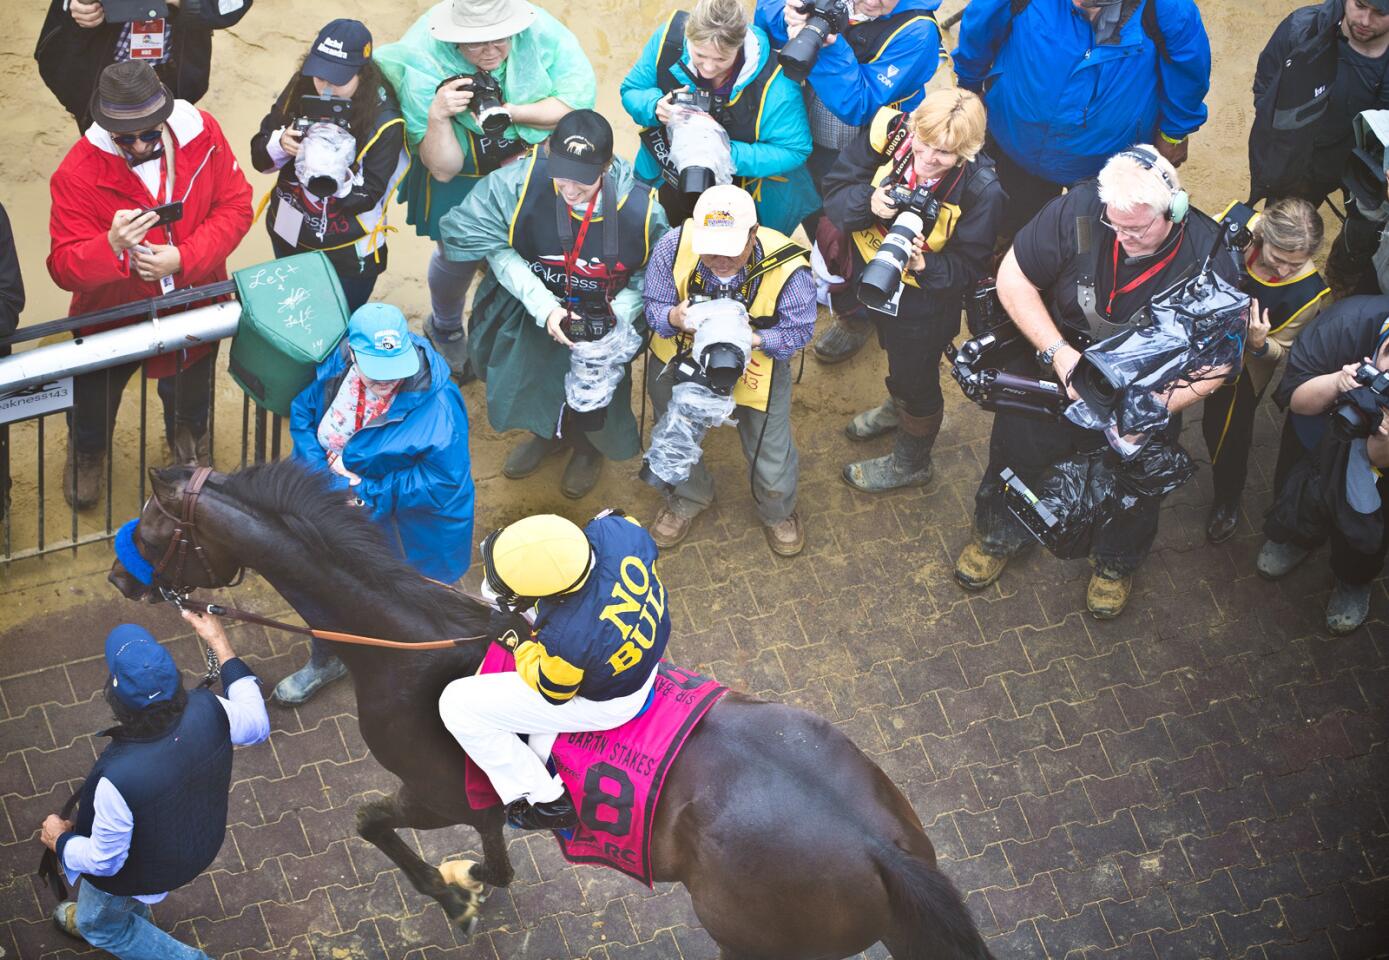 Mike E. Smith and Ax Man are surrounded by photographers after winning the Sir Barton Stakes, the 12th race in the 143rd Preakness Stakes at Pimlico in Baltimore.